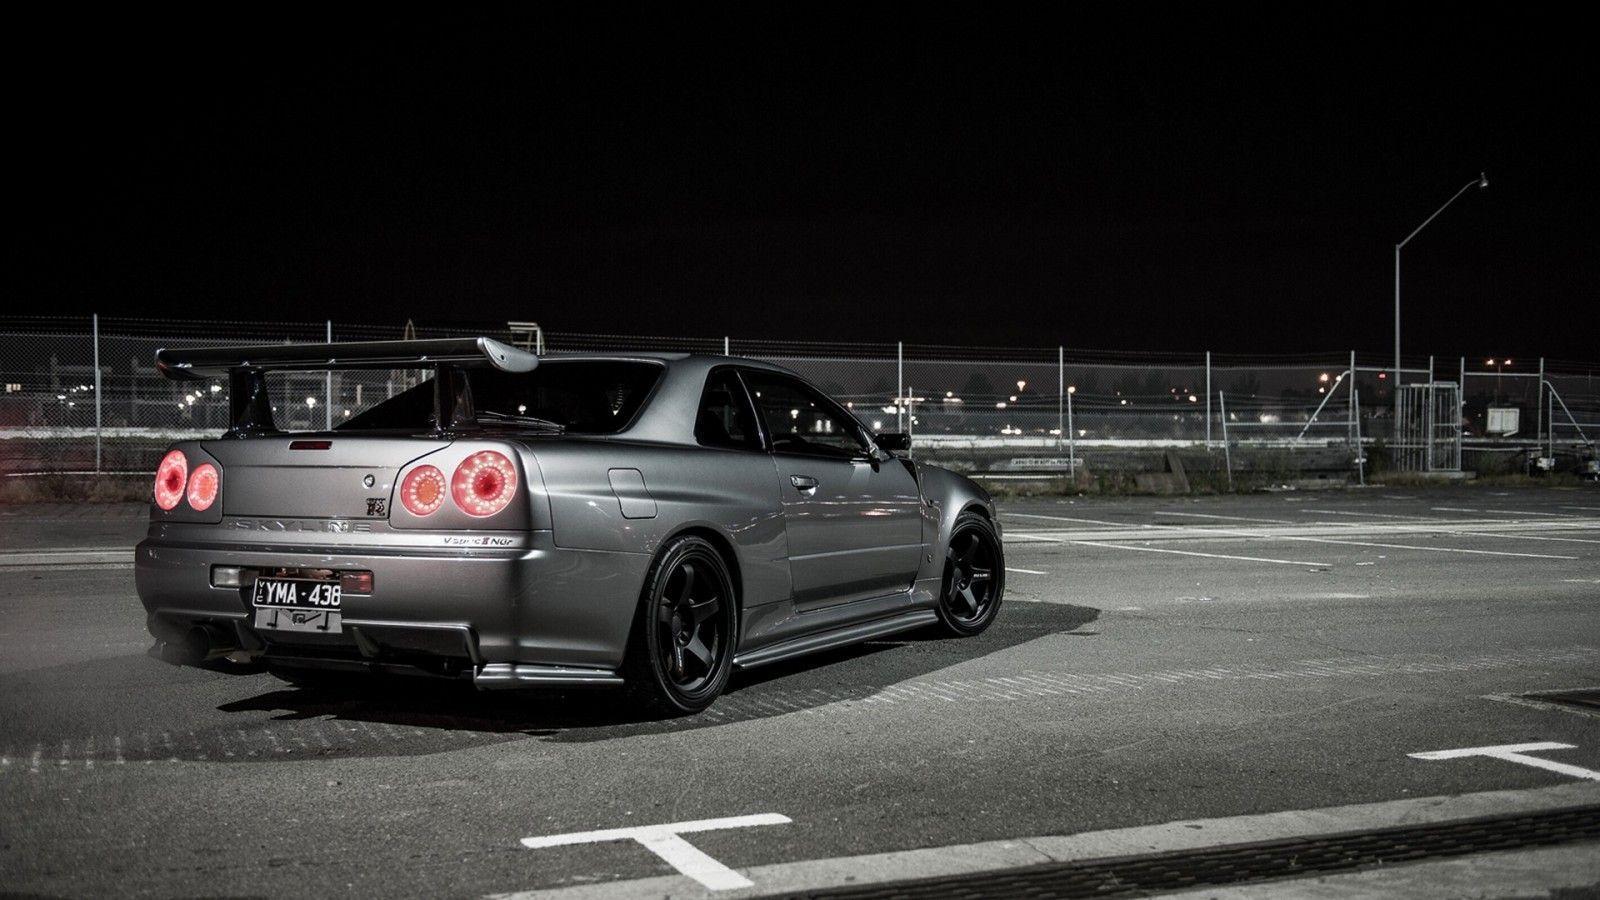 Jdm R34 Wallpapers Awesome Wallpapers